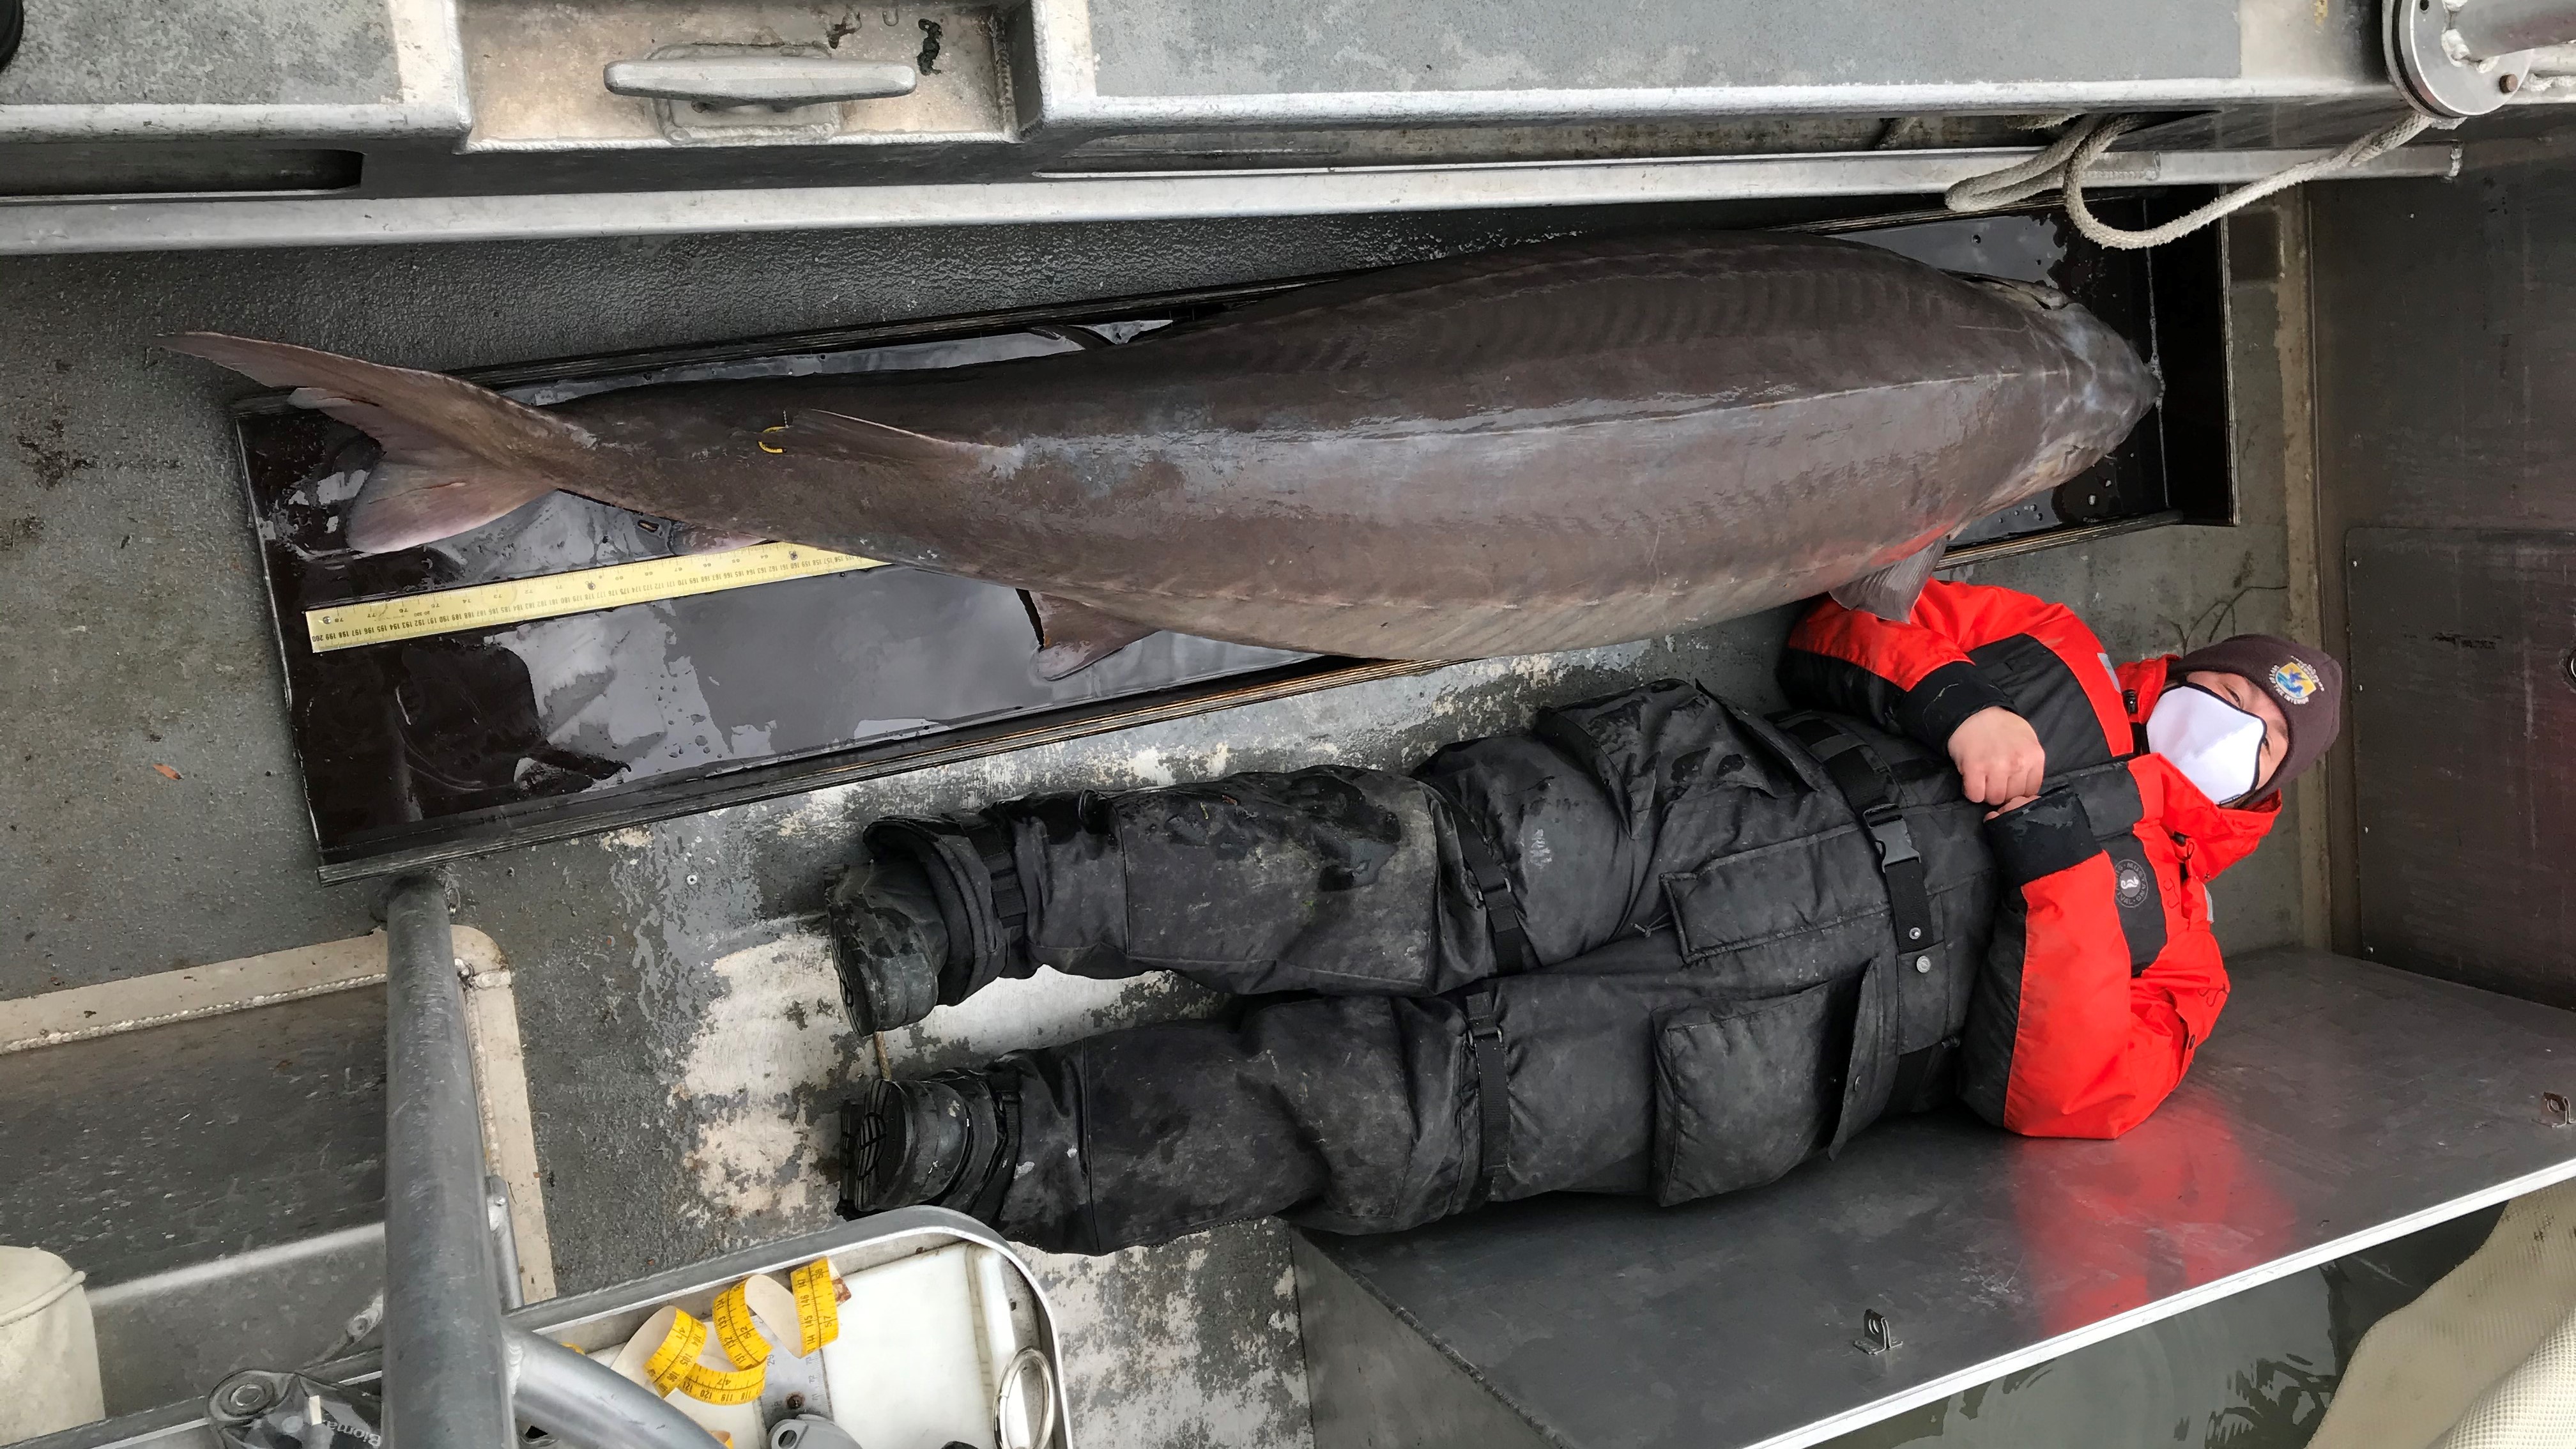 Giant 'river monster' fish found in Detroit River may be over 100 years old  - KYMA